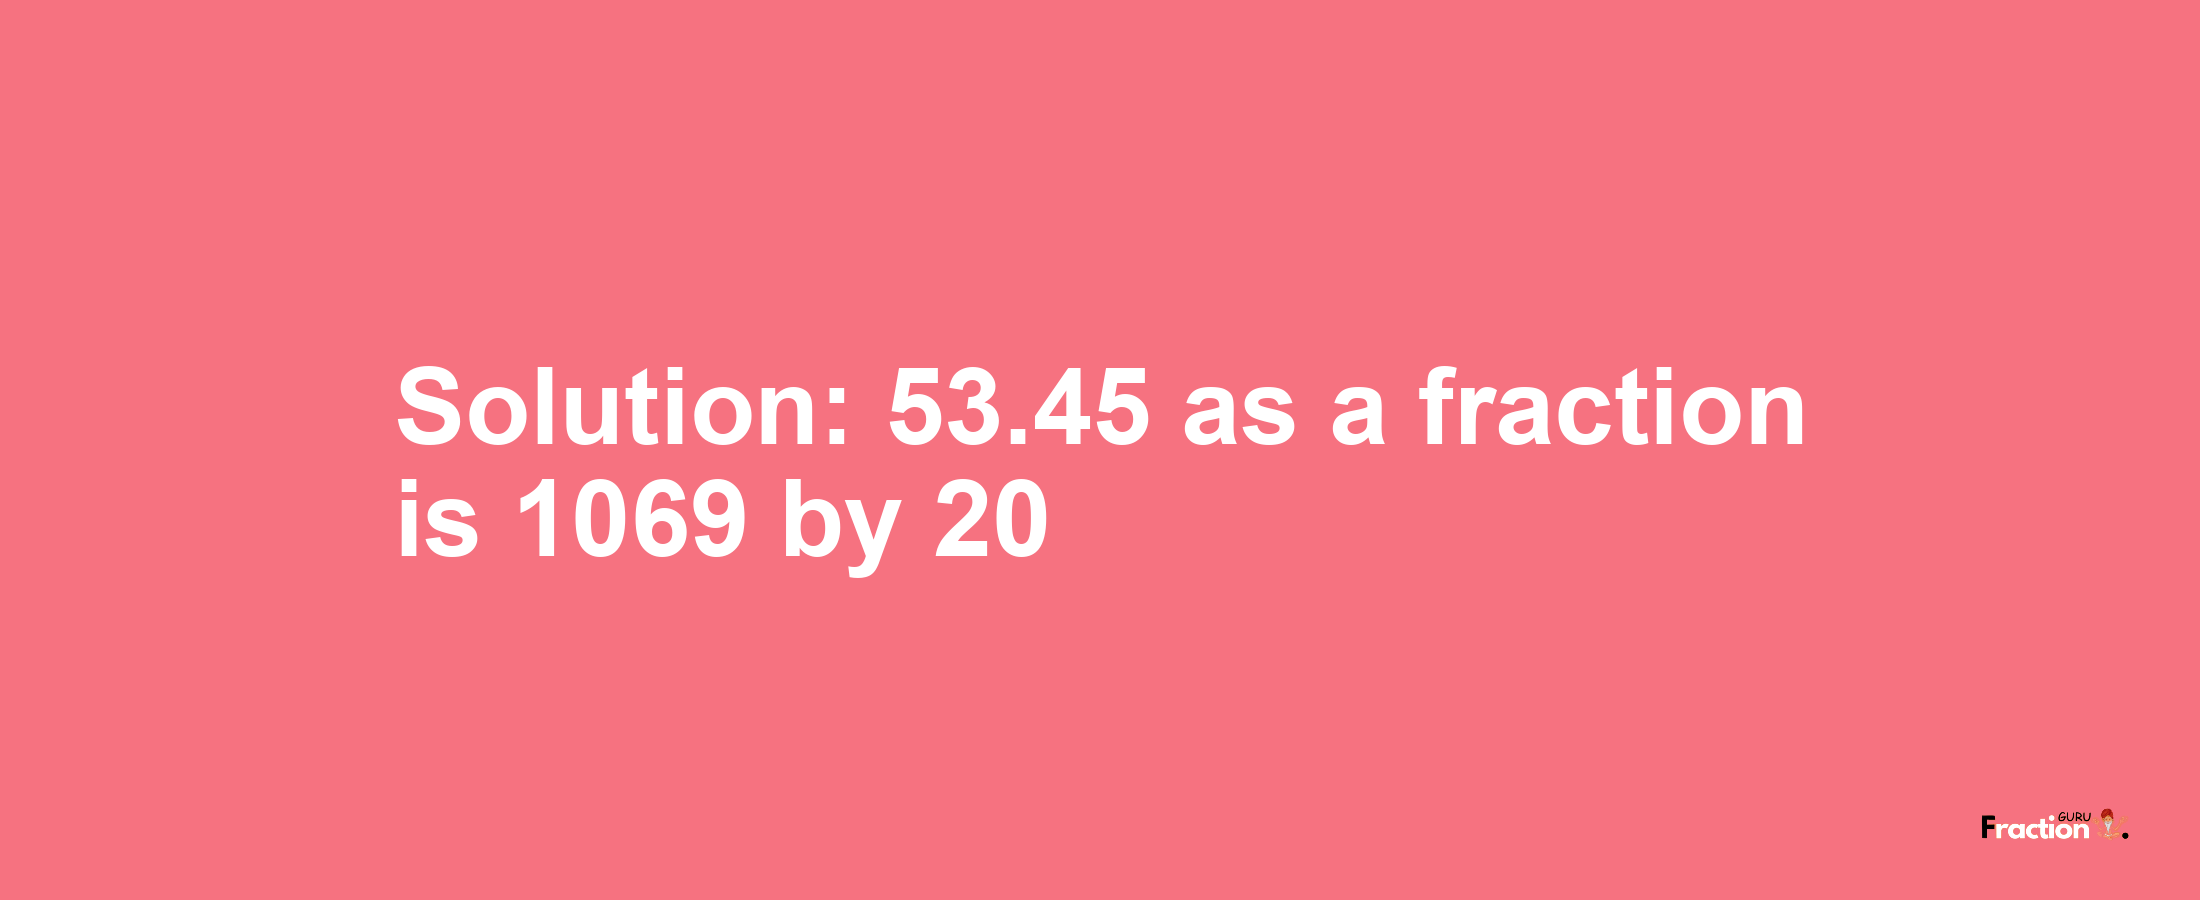 Solution:53.45 as a fraction is 1069/20